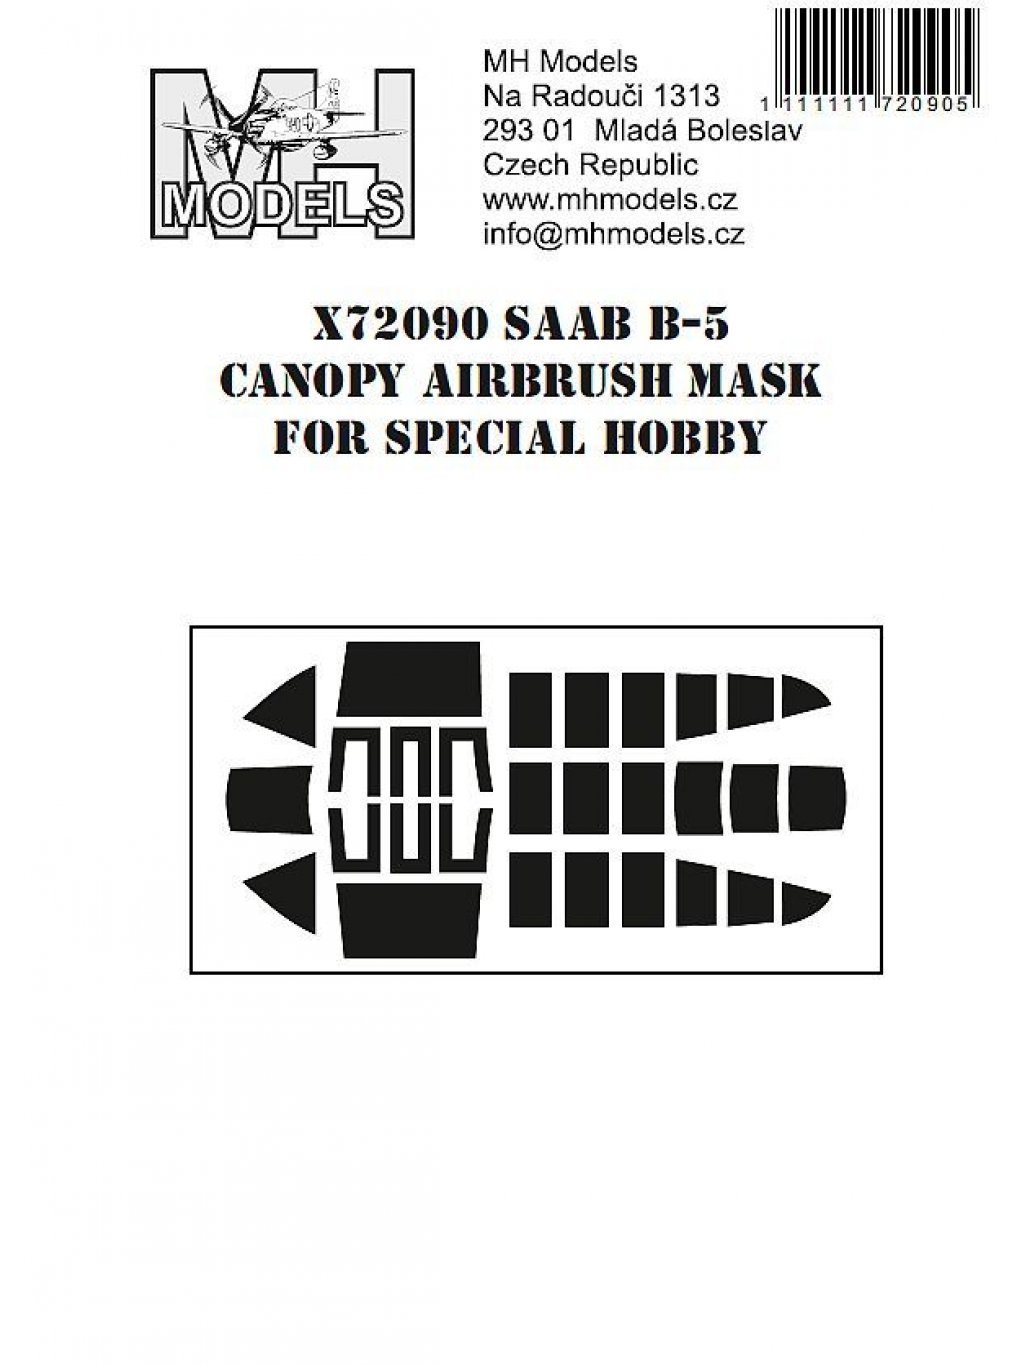 SAAB B-5 Canopy airbrush mask for Special Hobby